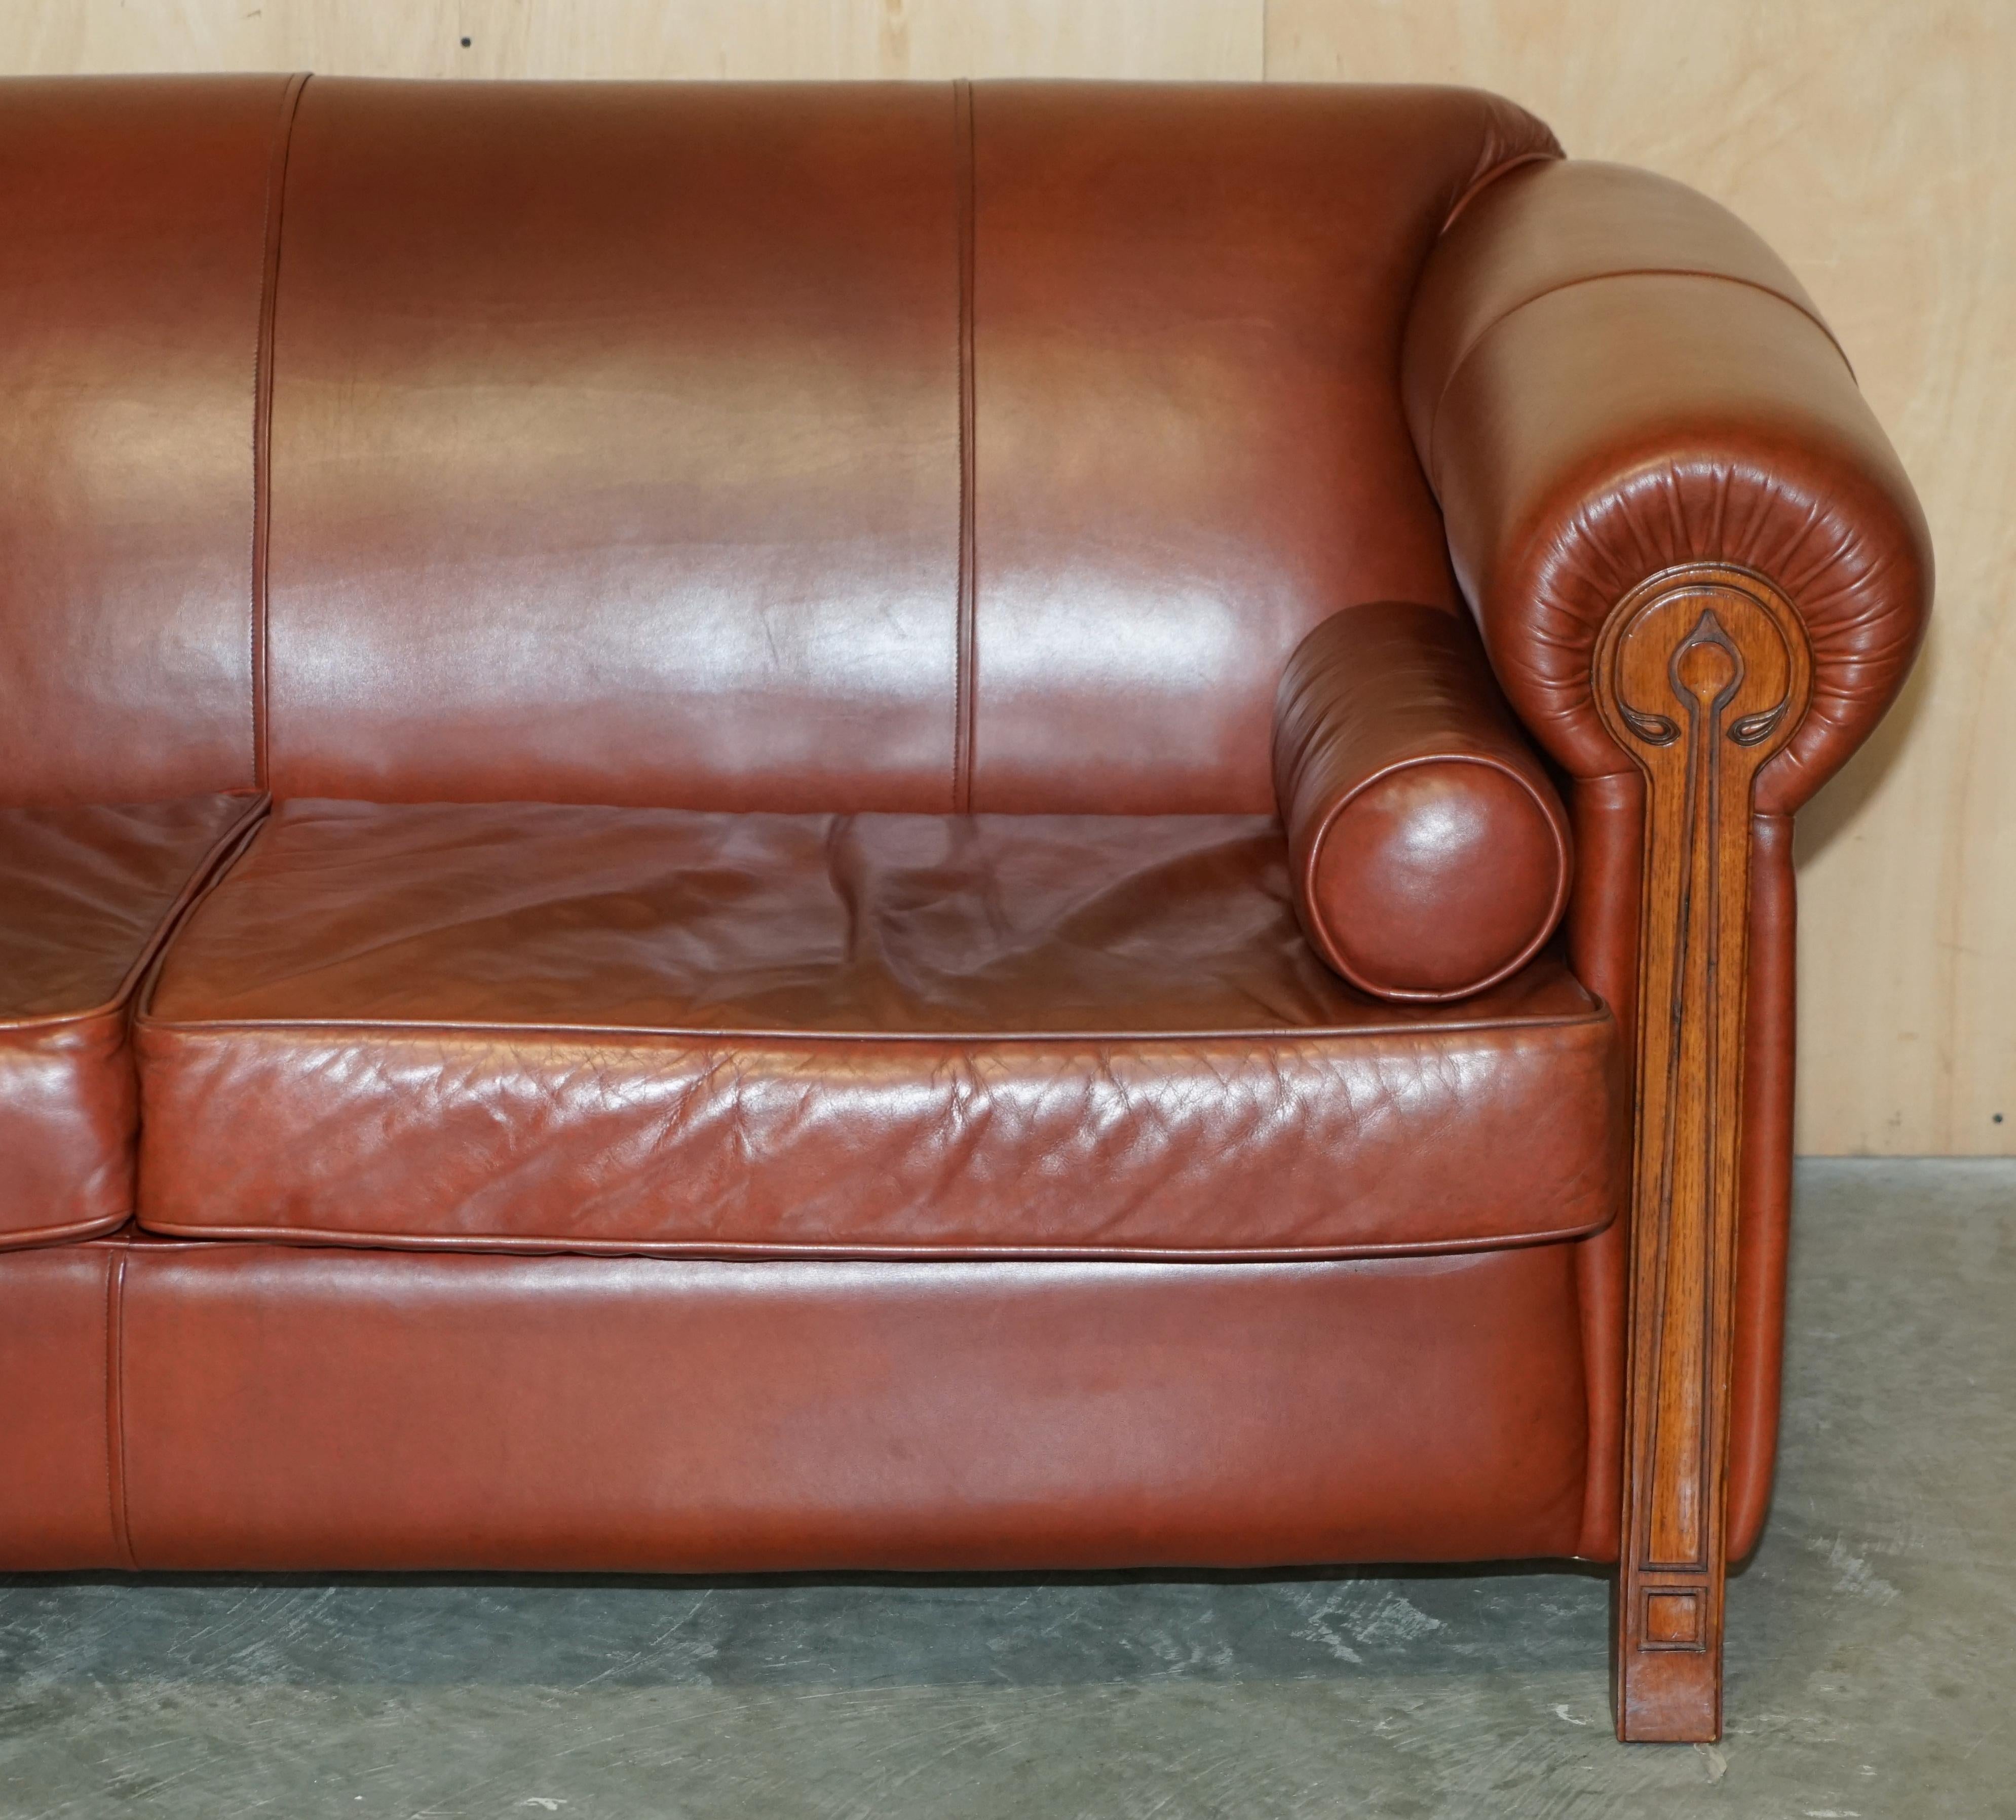 ViNTAGE CHESTNUT BROWN LEATHER LIBERTY'S ART NOUVEAU CLUB SOFA CARVED WOOD FRAMe For Sale 4